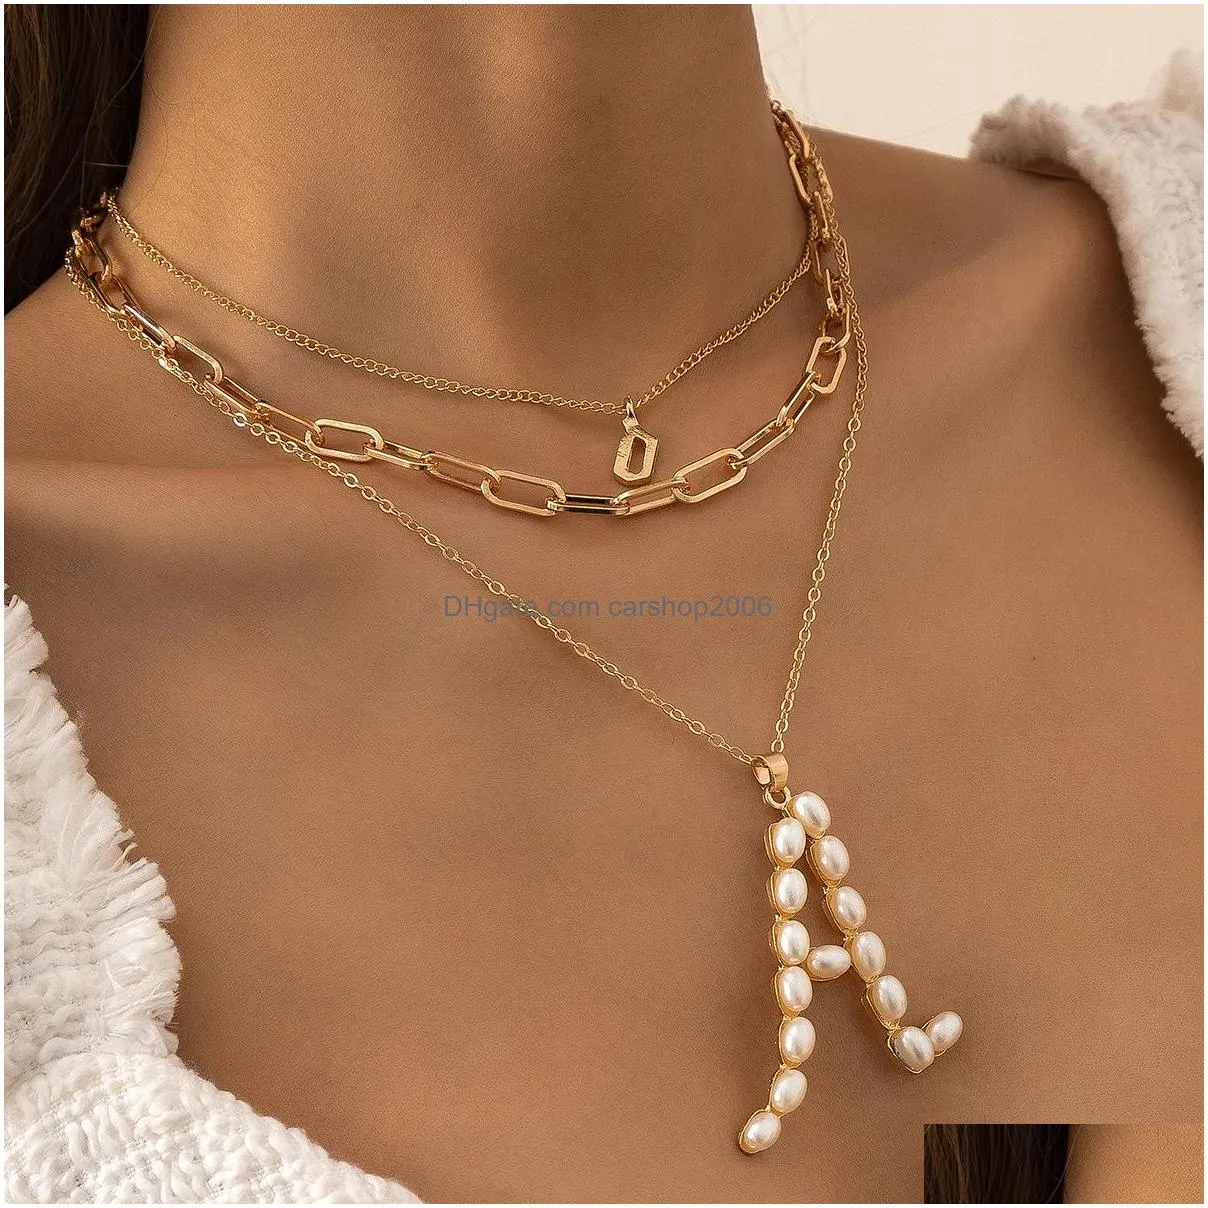 fashion jewelry multi layer necklace geometric chain letter a pendant choker necklaces